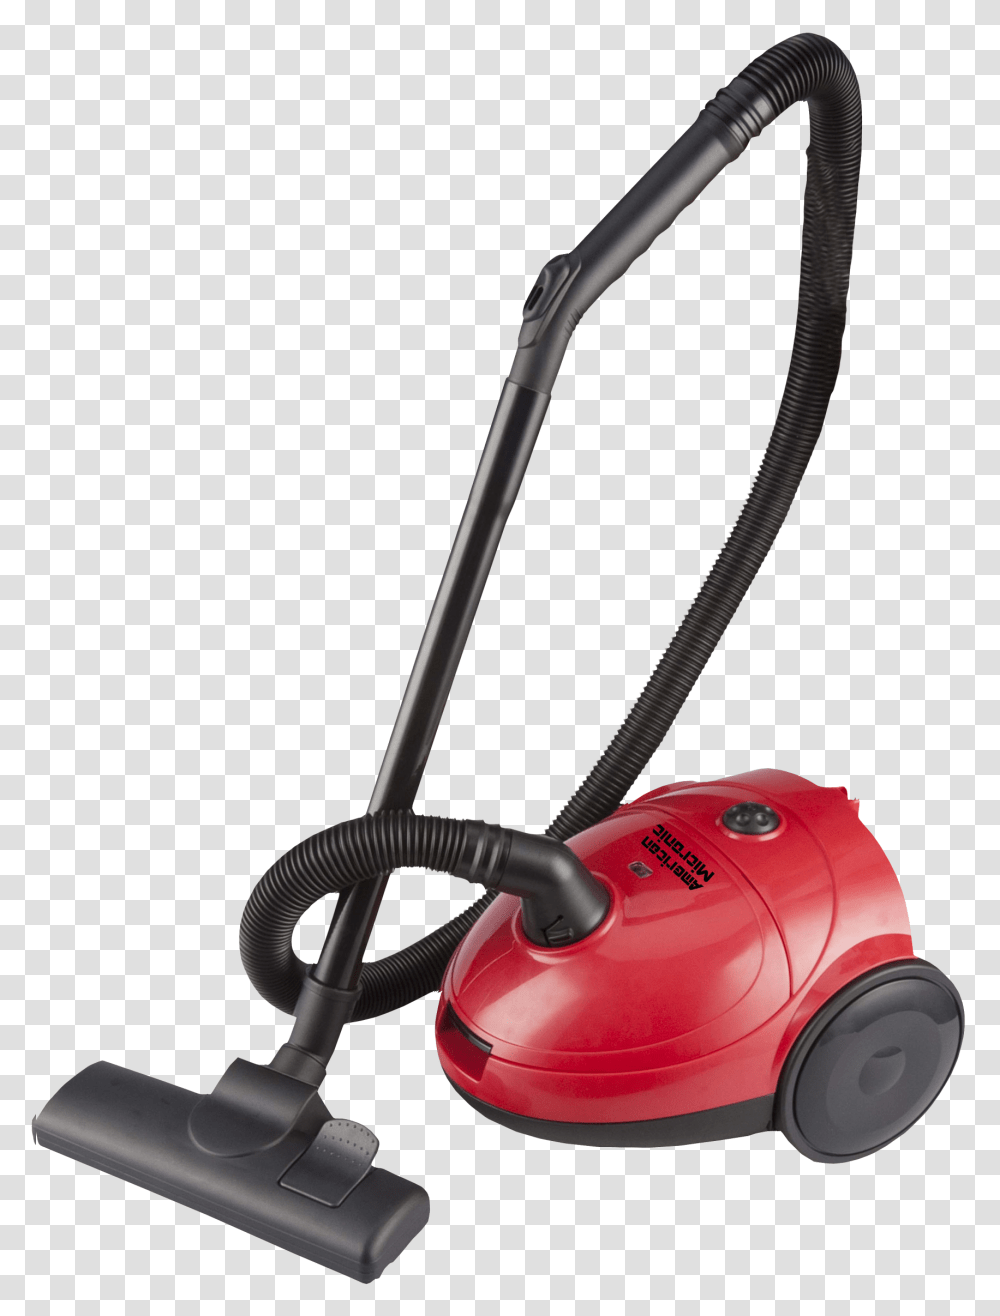 Office Vacuum Cleaner Image, Electronics, Lawn Mower, Tool, Appliance Transparent Png